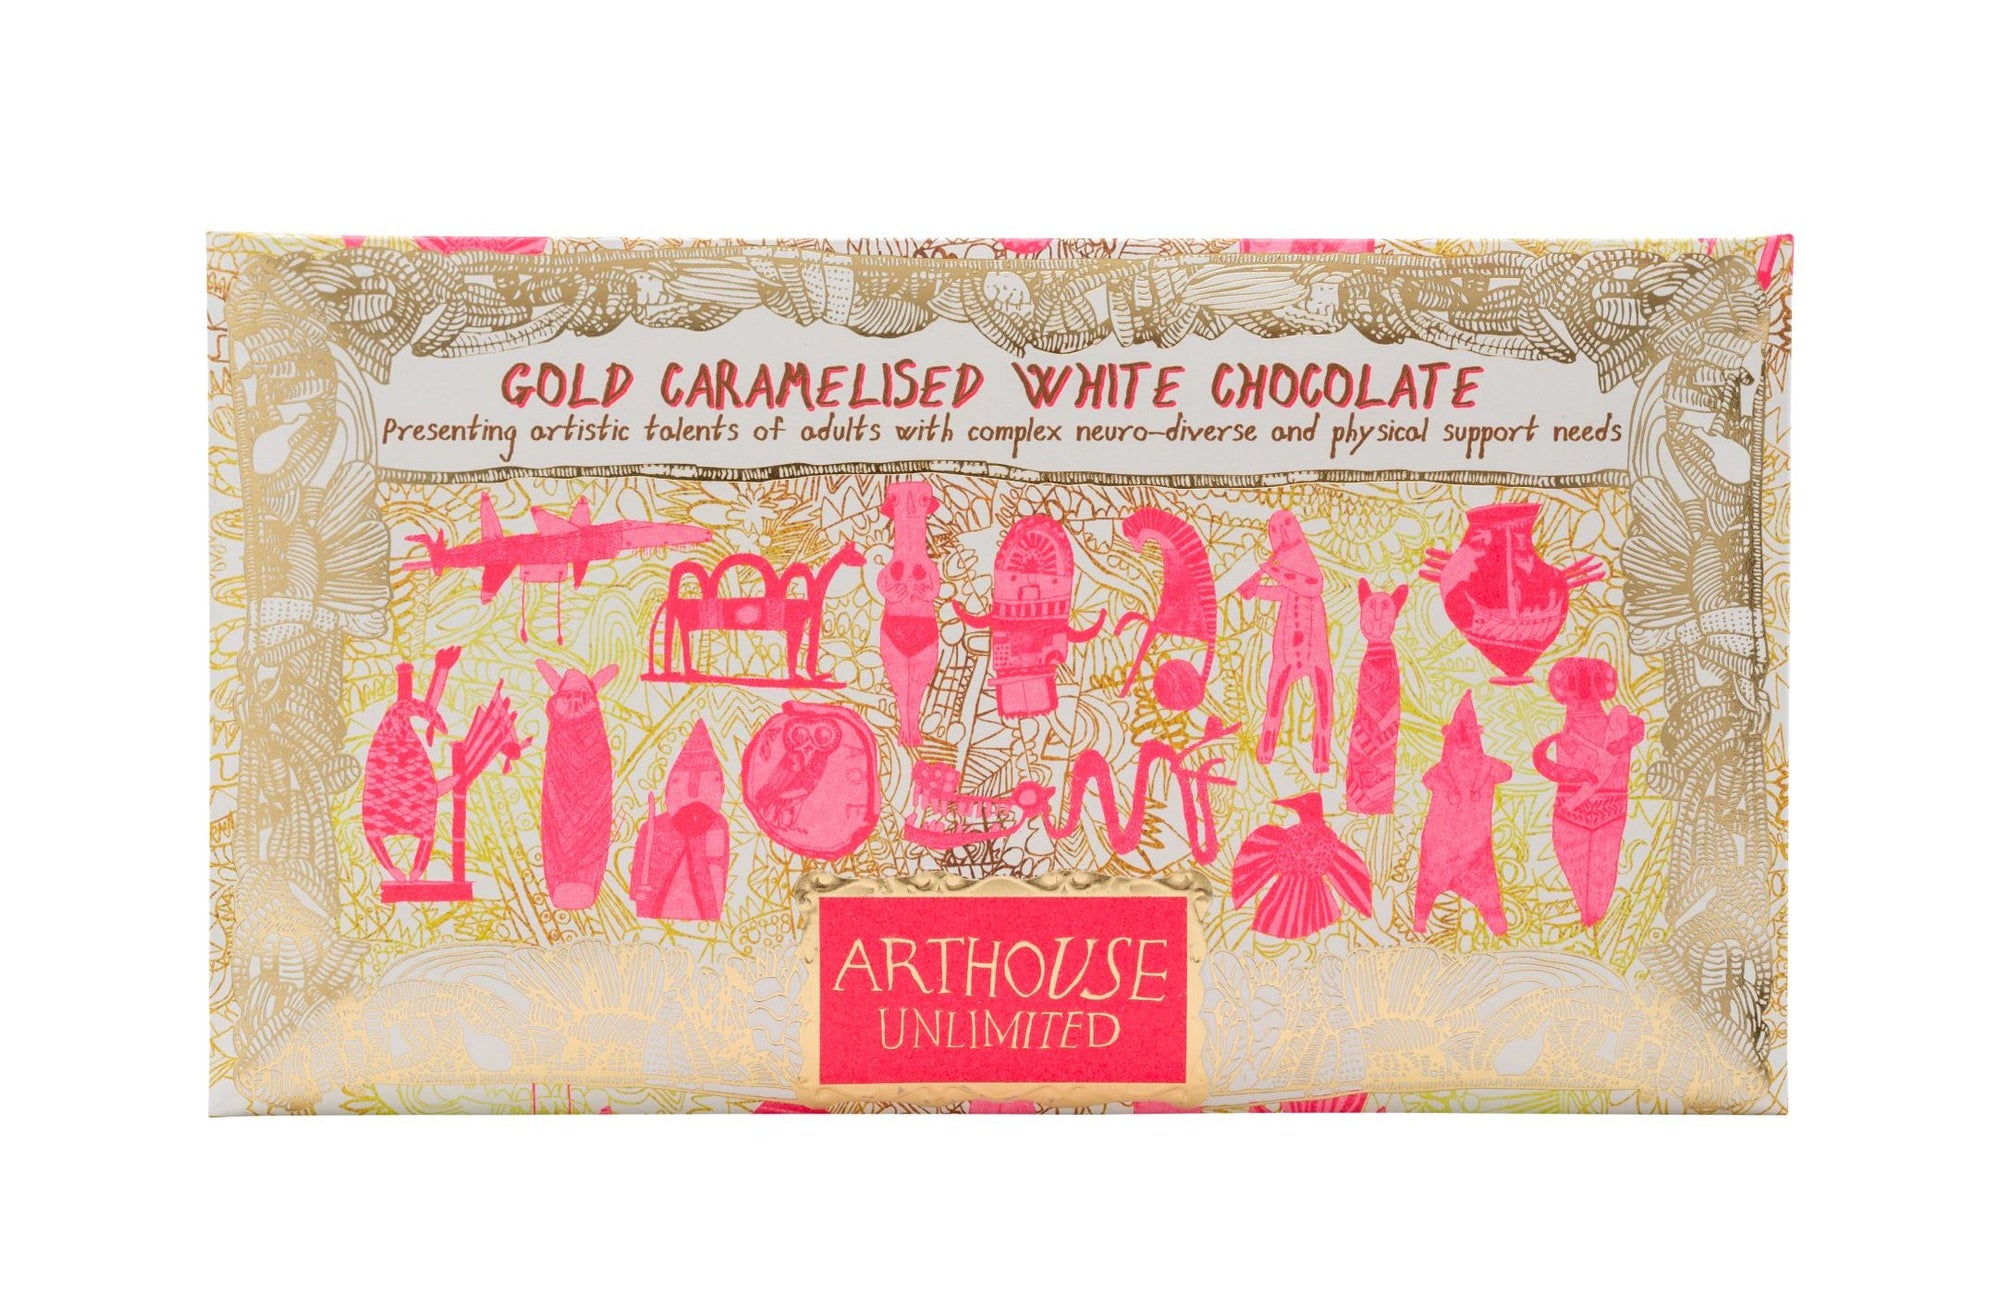 Timeless Treasures Chocolate Bar - Gold Caramelised White Chocolate by arthouse unlimited at penny black